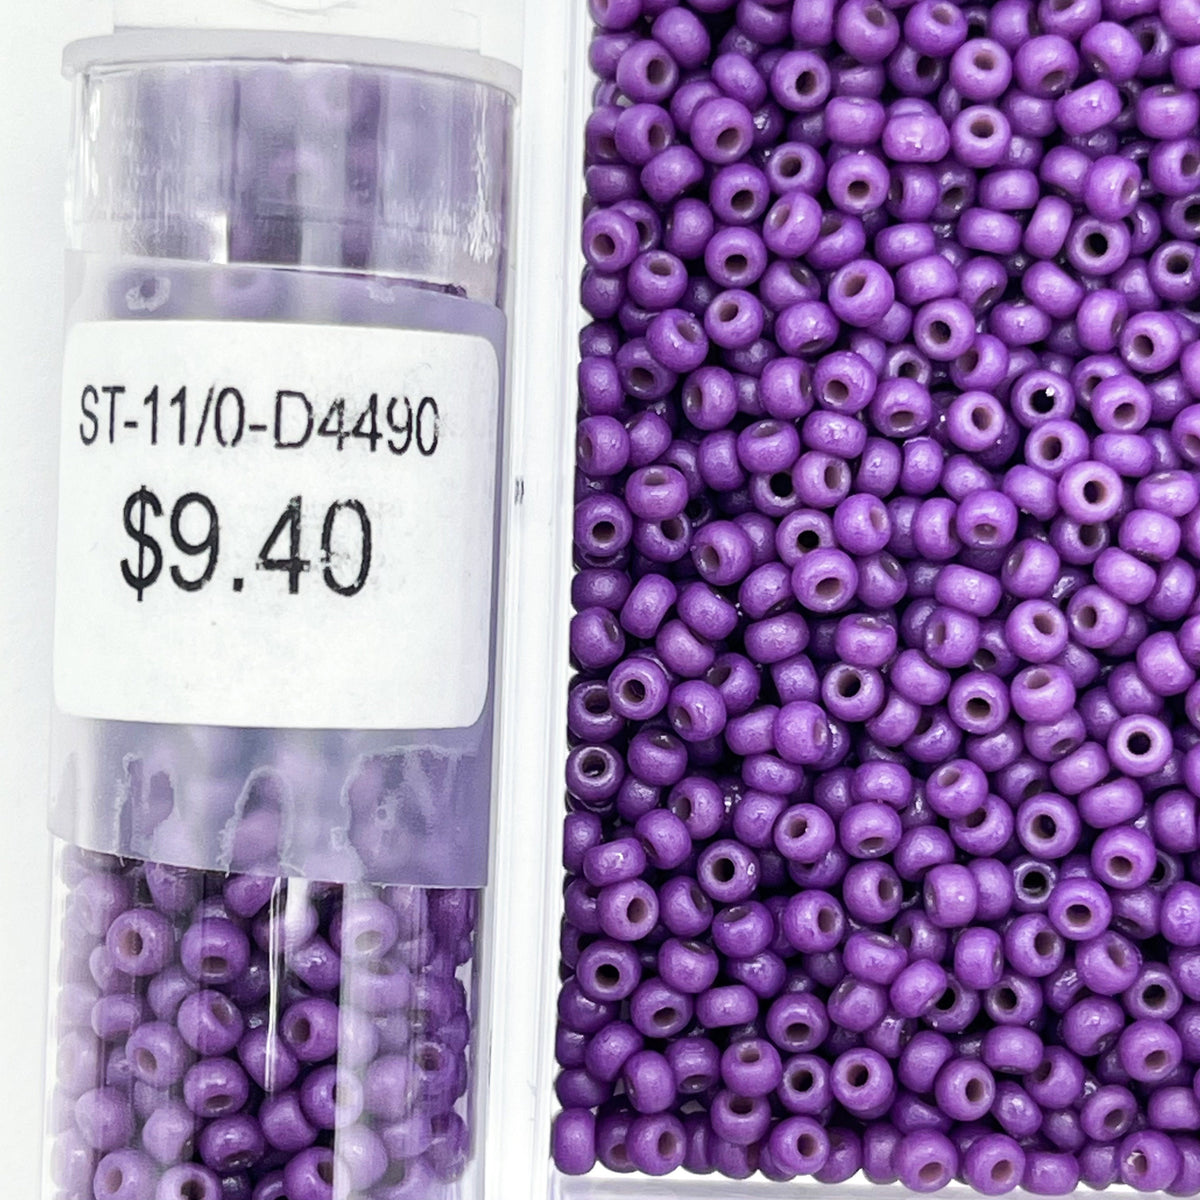 Japanese Glass Seed Beads Size 11/0-D4490 Permanent Opaque Dark Purple